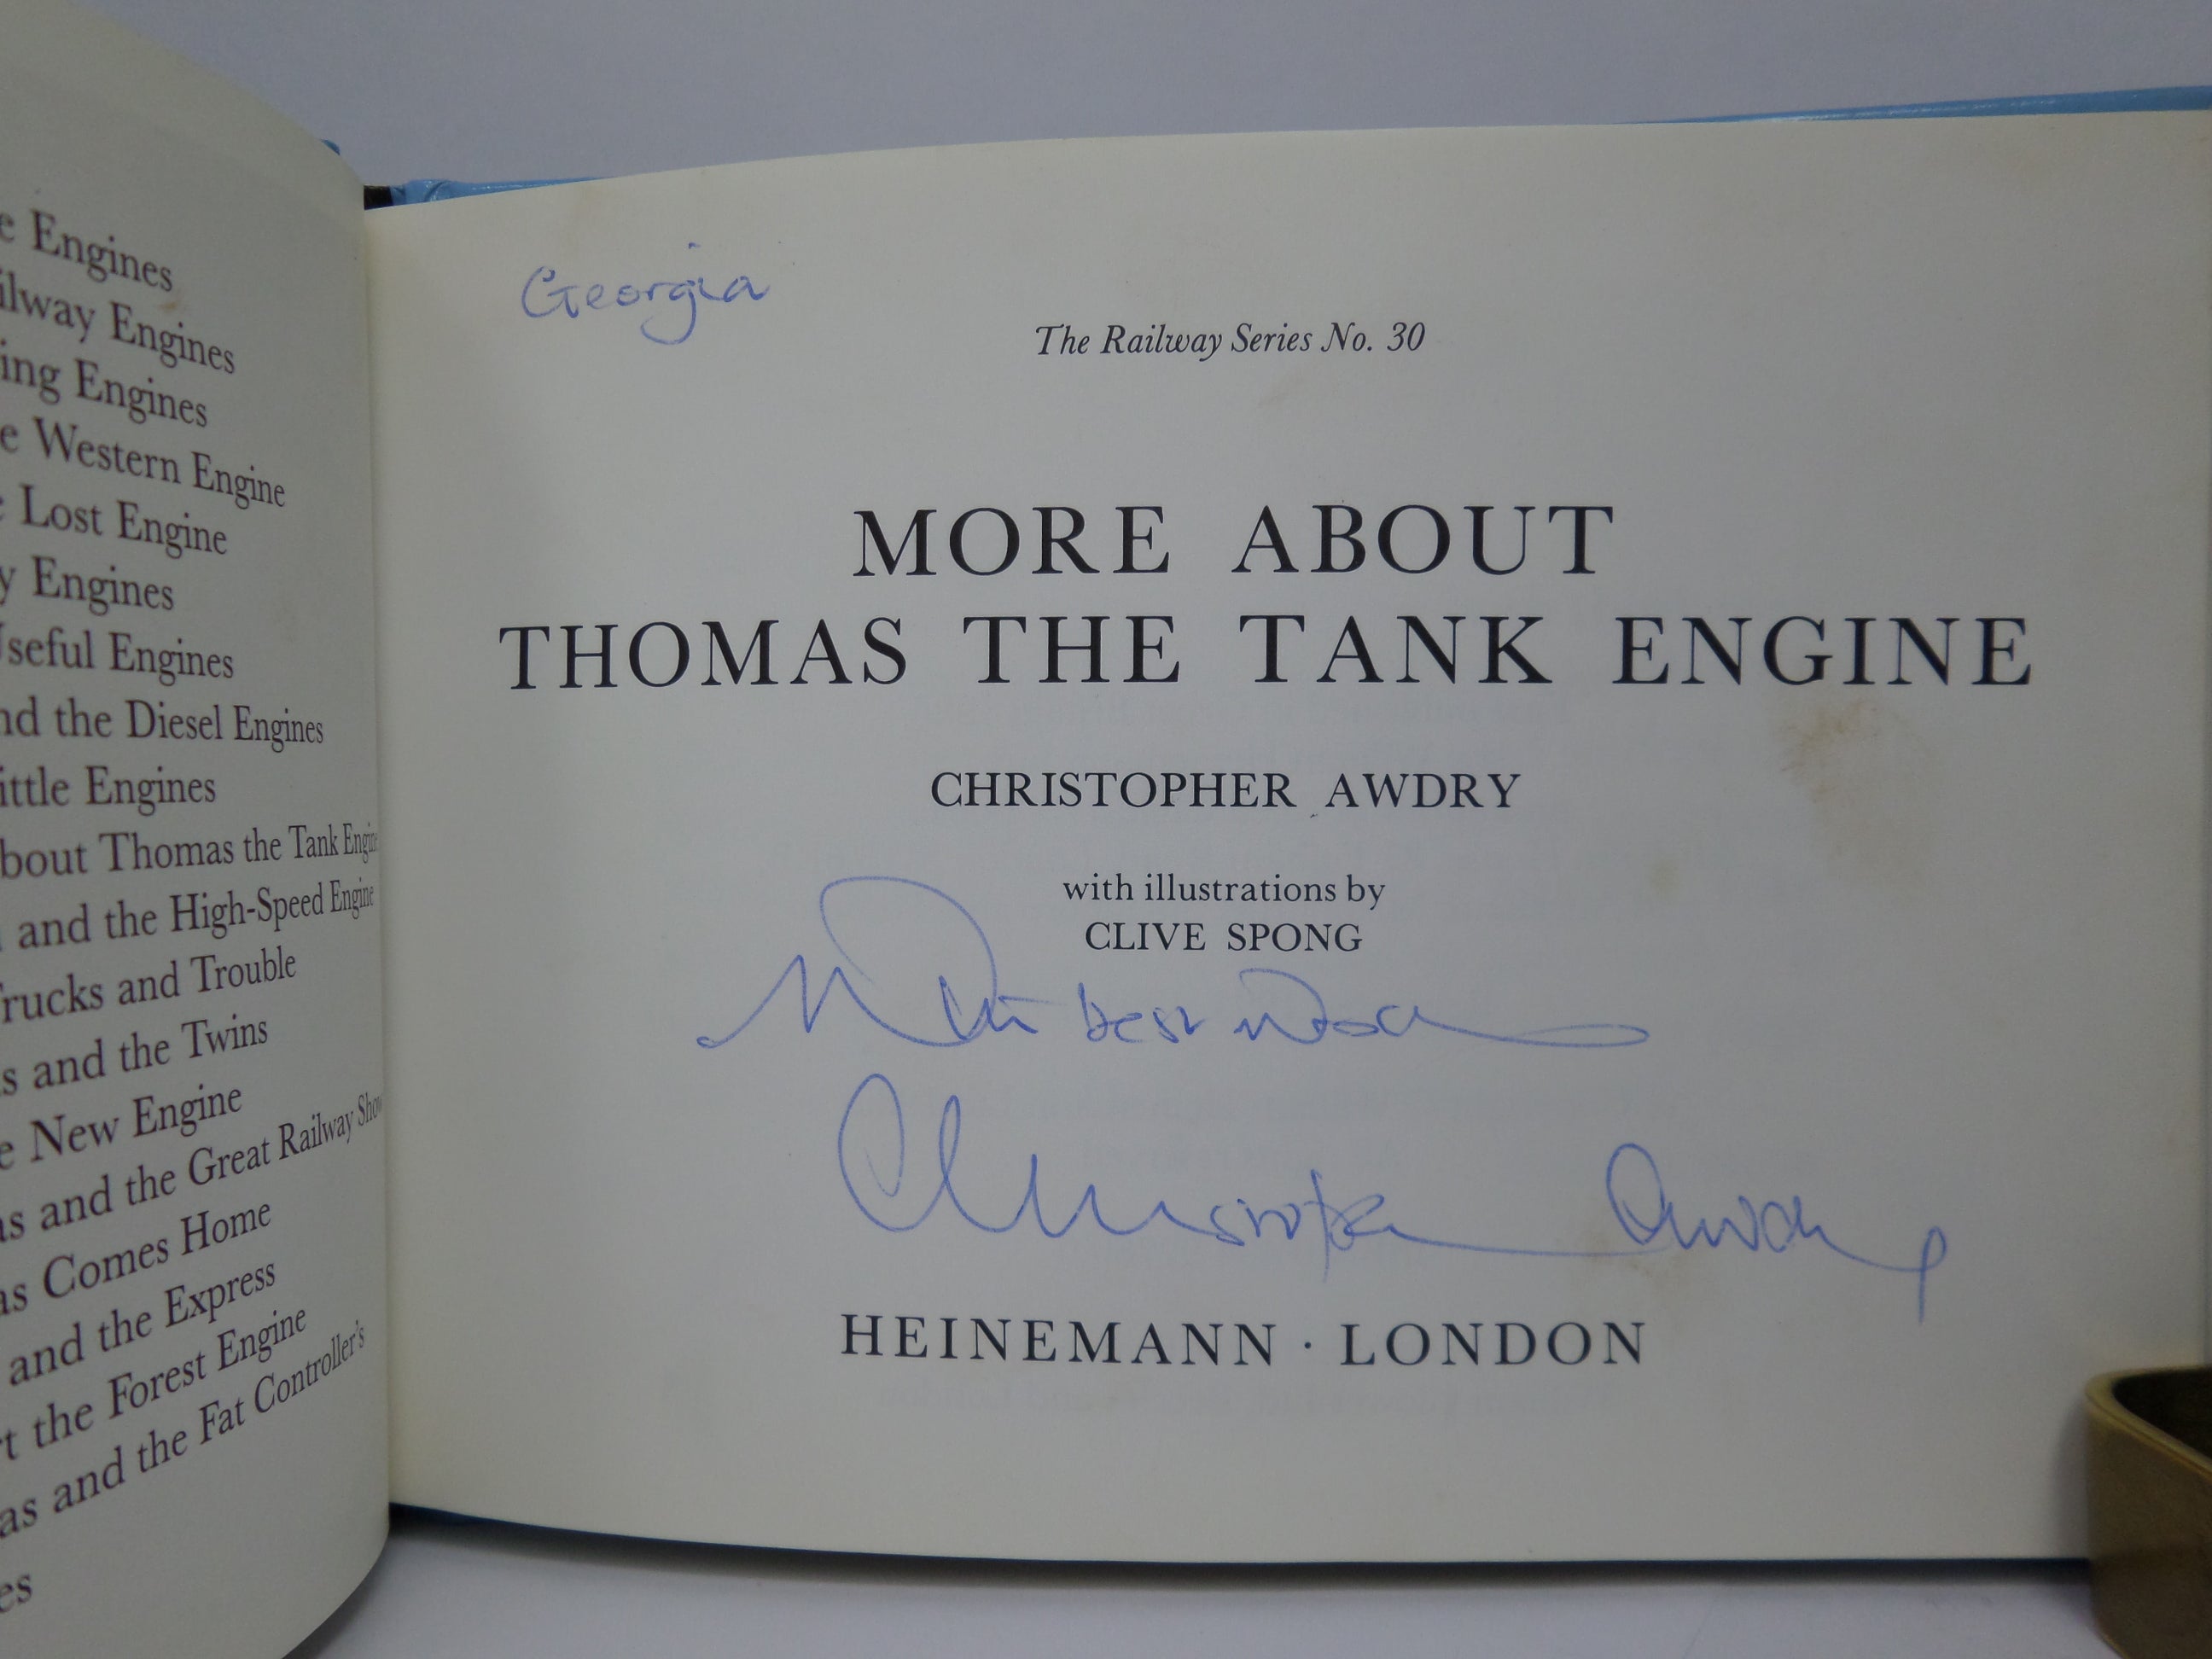 MORE ABOUT THOMAS THE TANK ENGINE BY CHRISTOPHER AWDRY 1995 SIGNED BY AUTHOR